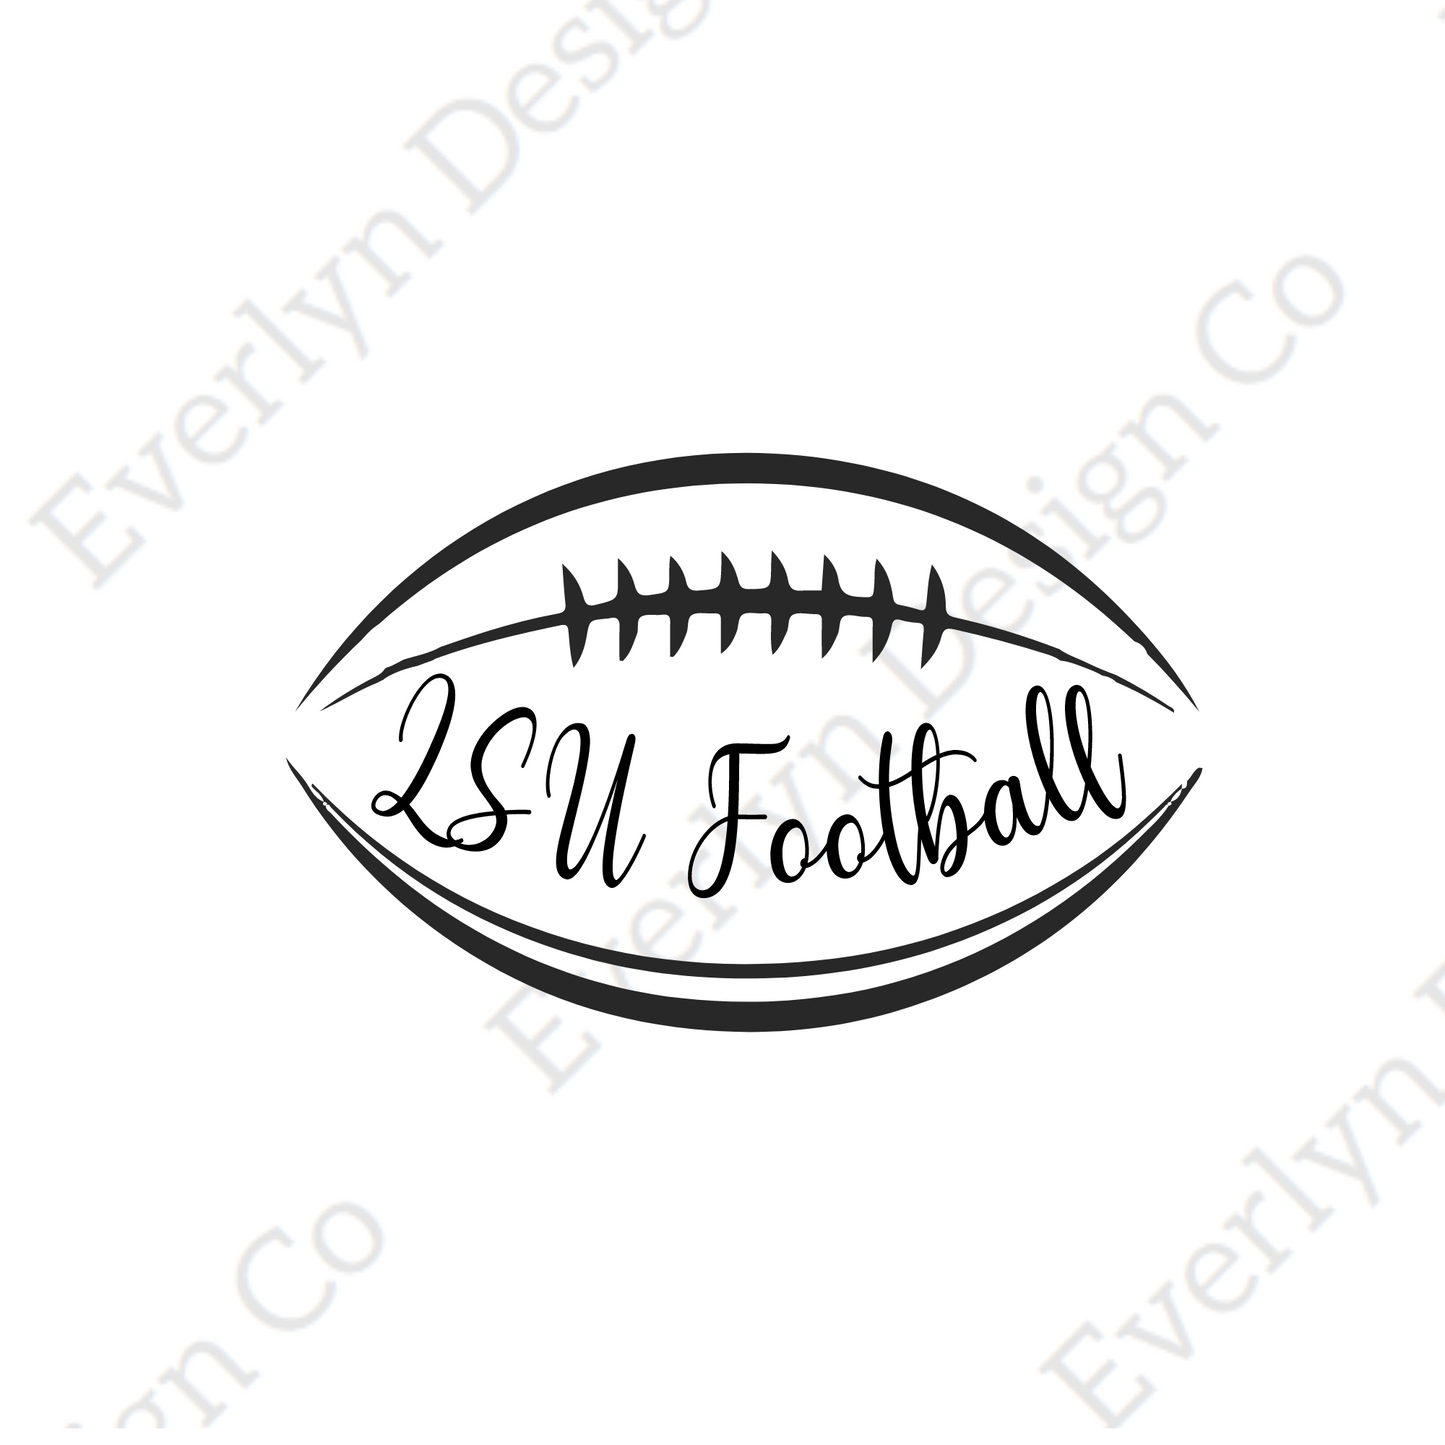 LSU Football SVG File- Includes commercial license